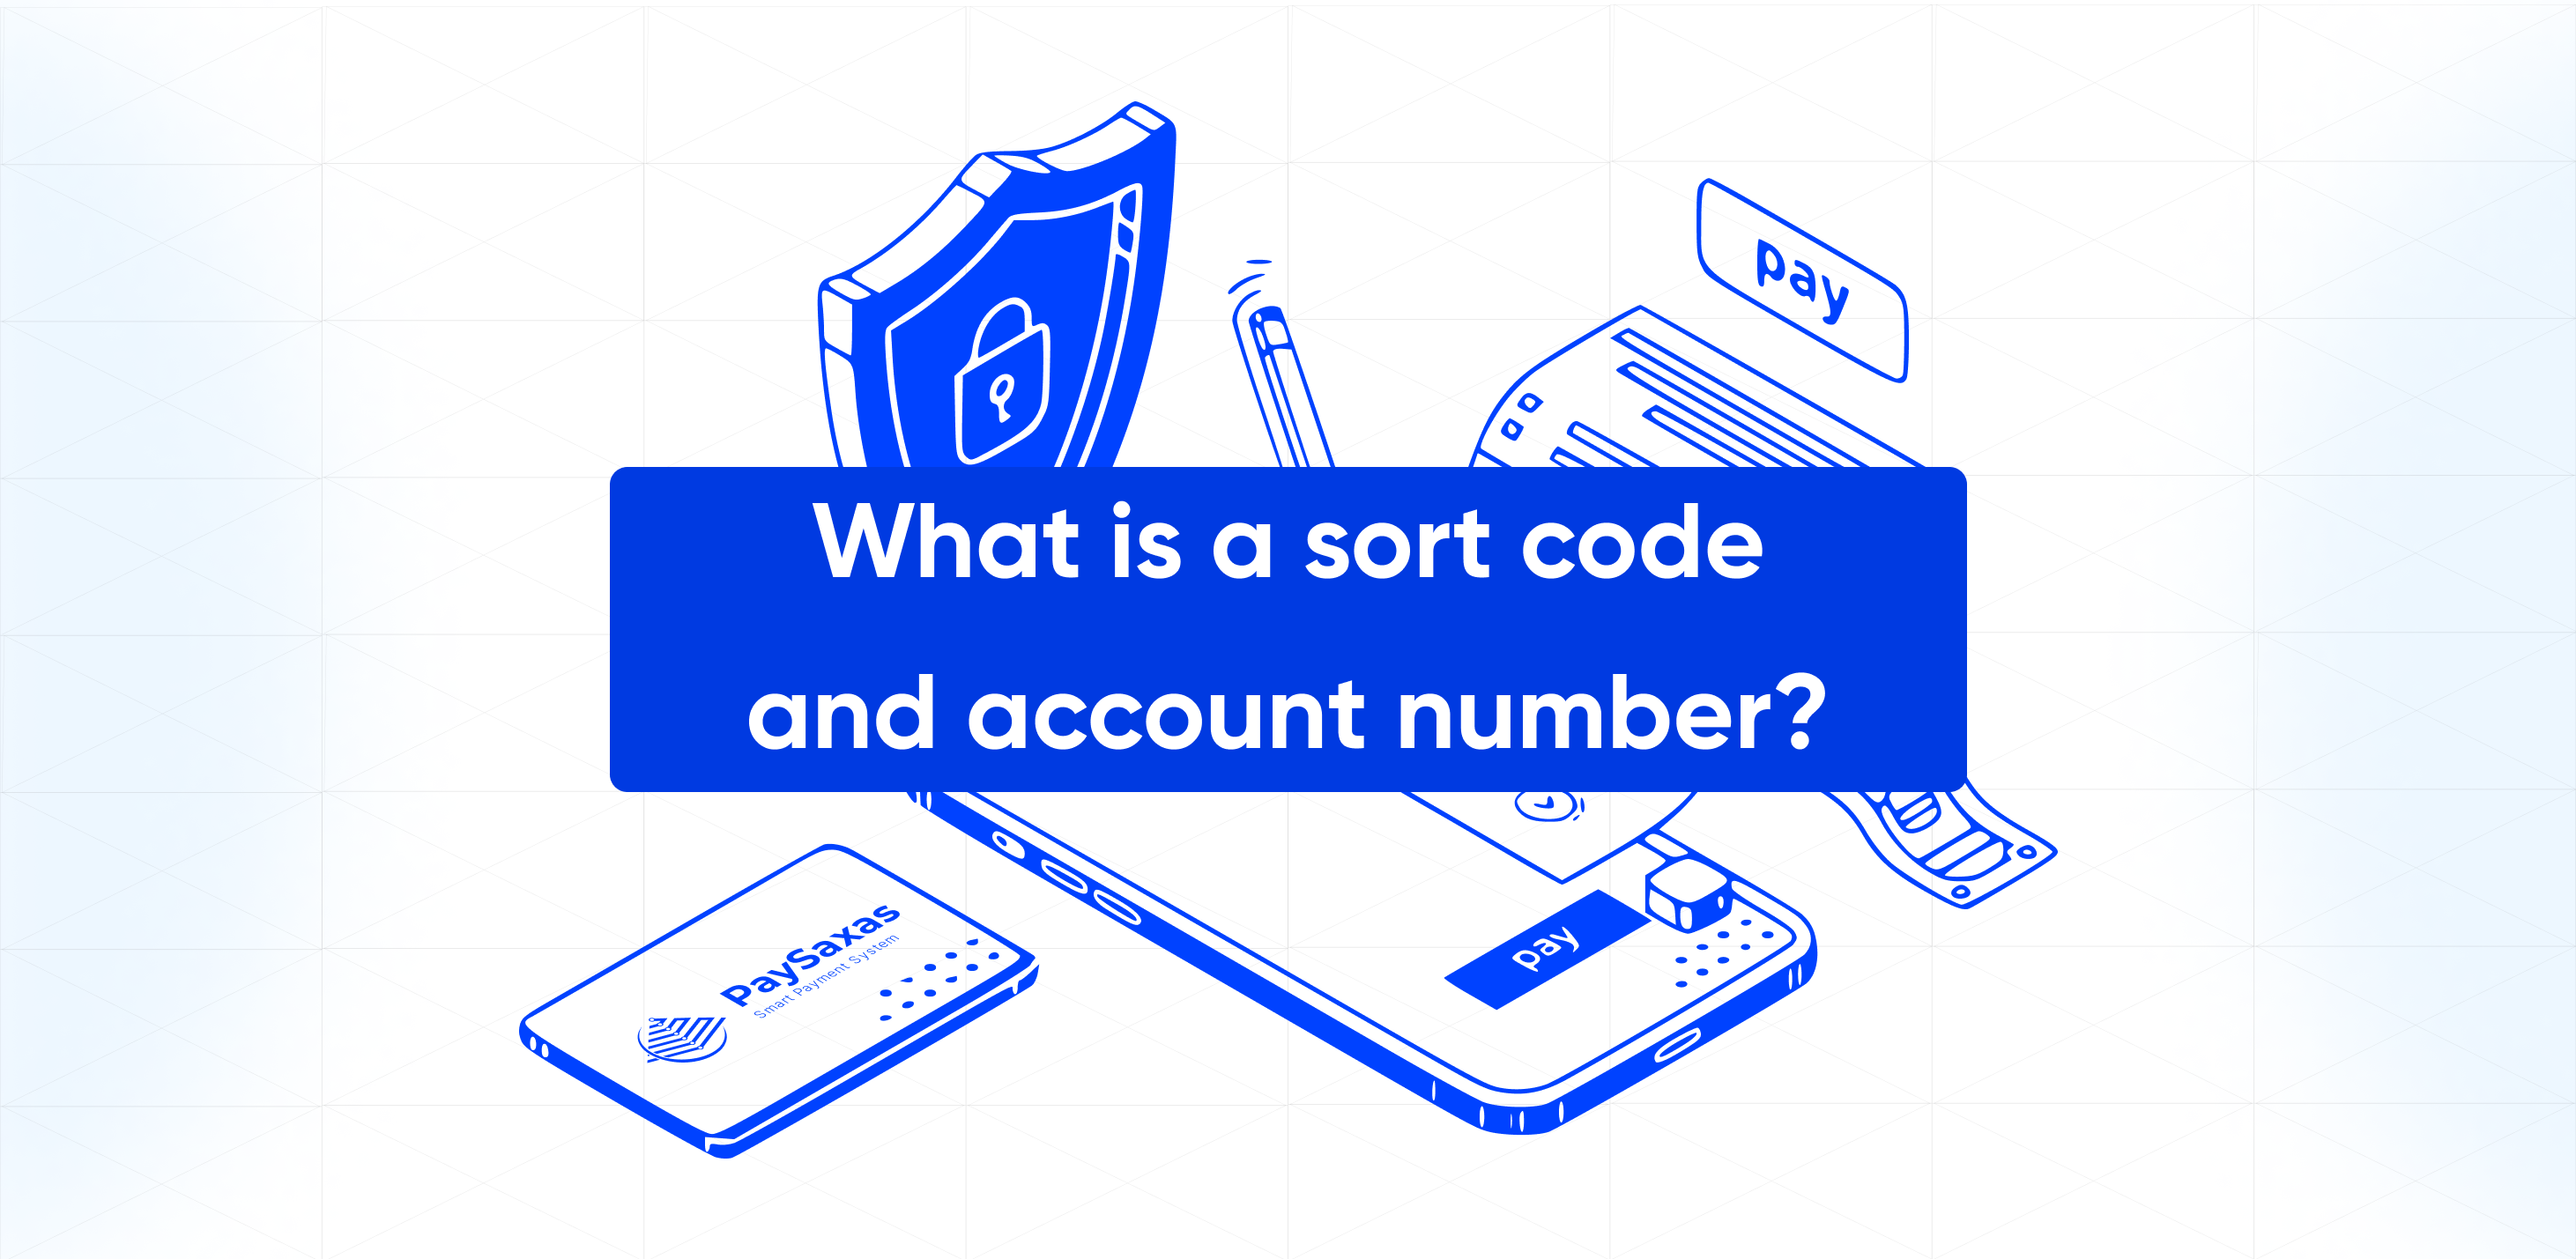 What is a sort code and account number?